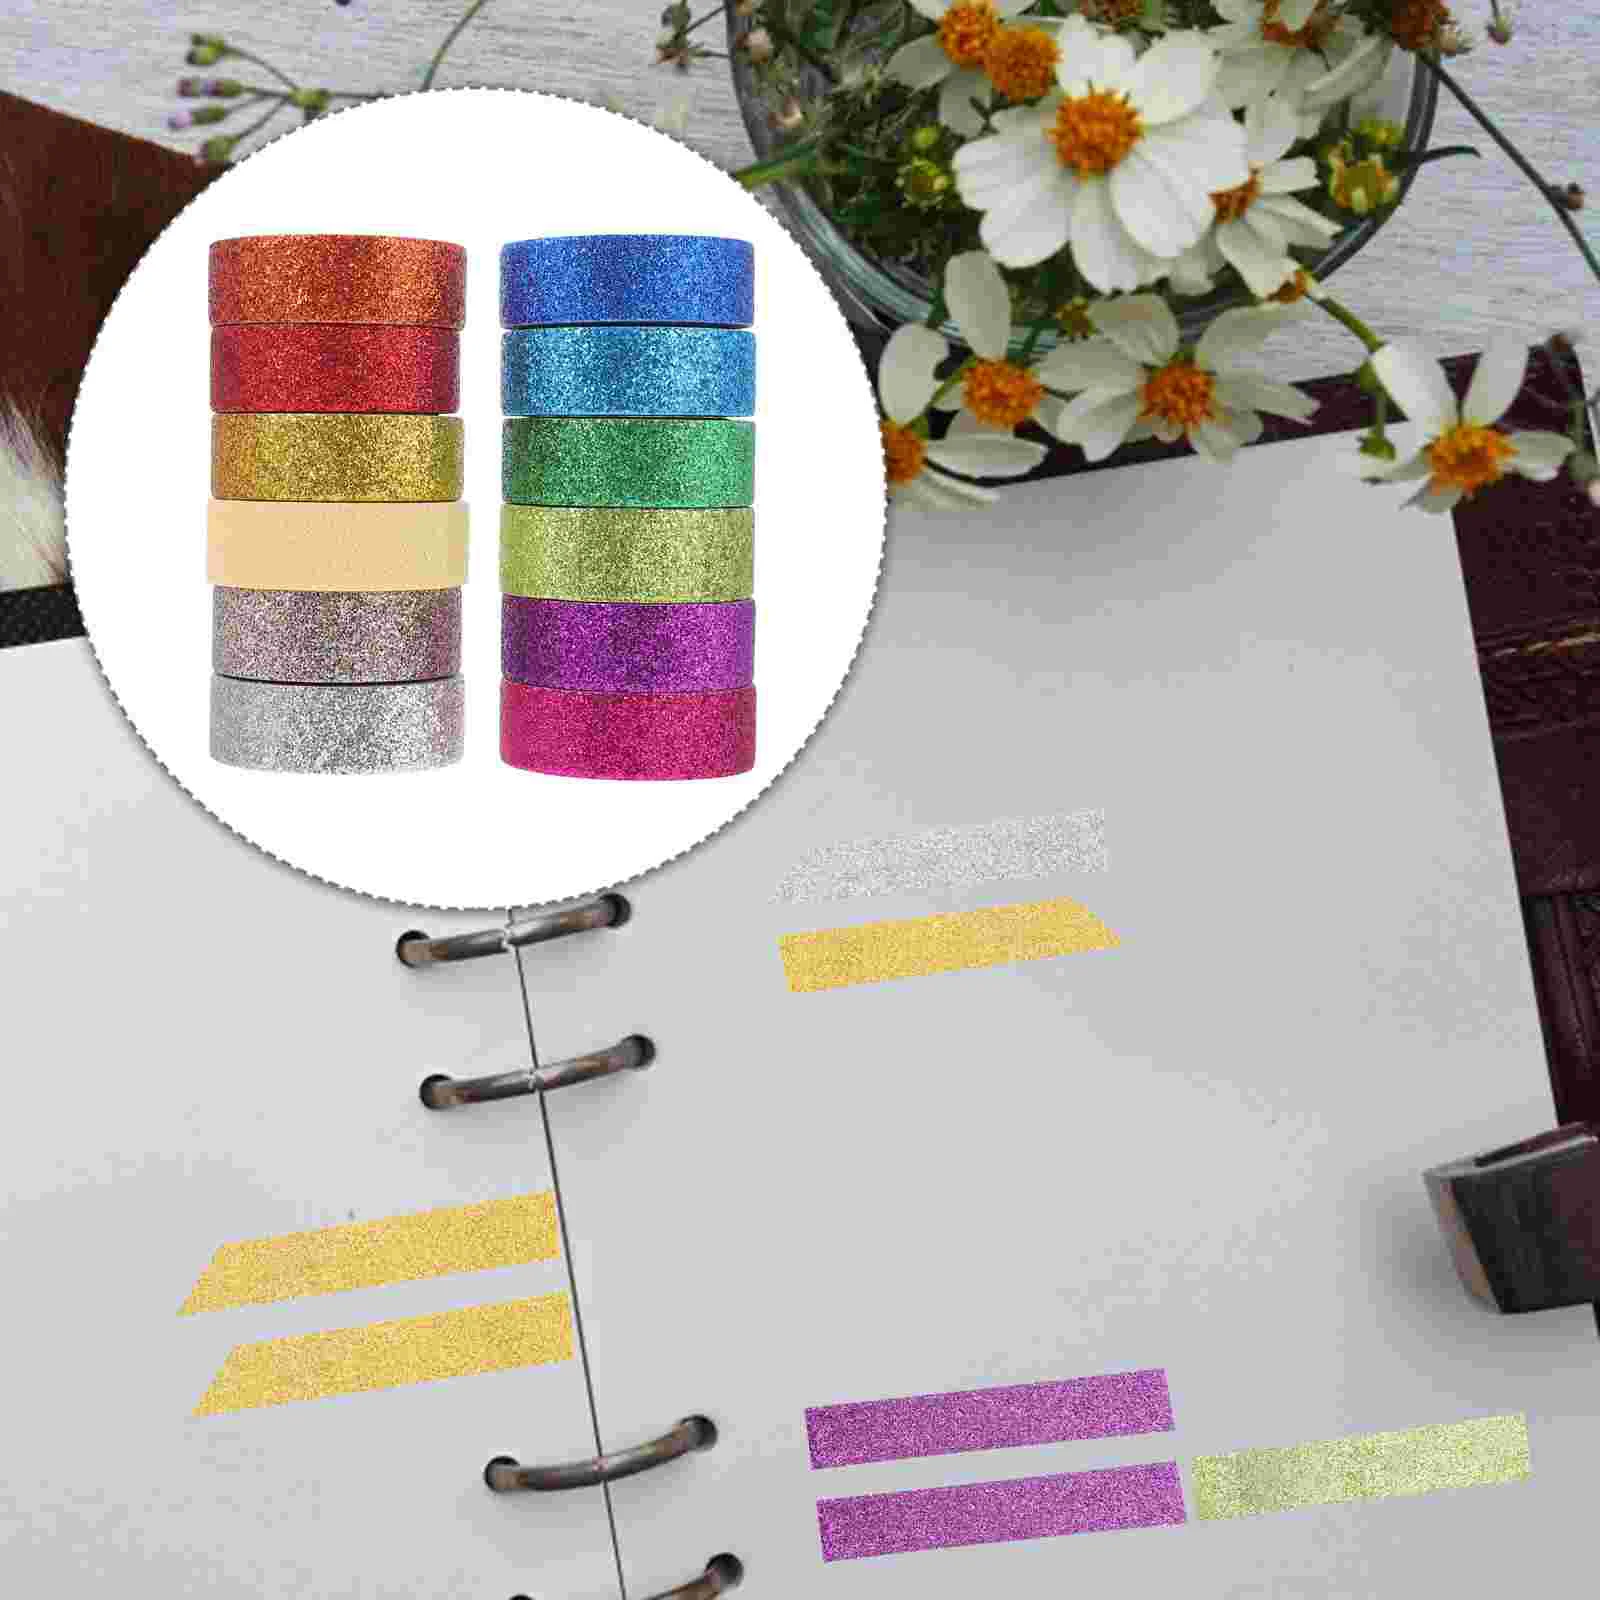 

Tape Washi Glitter Tapes Colored Masking Decorative Diy Gift Sticky Craft Wrapping Adhesive Sticker Scrapbooking Paper Diary Set